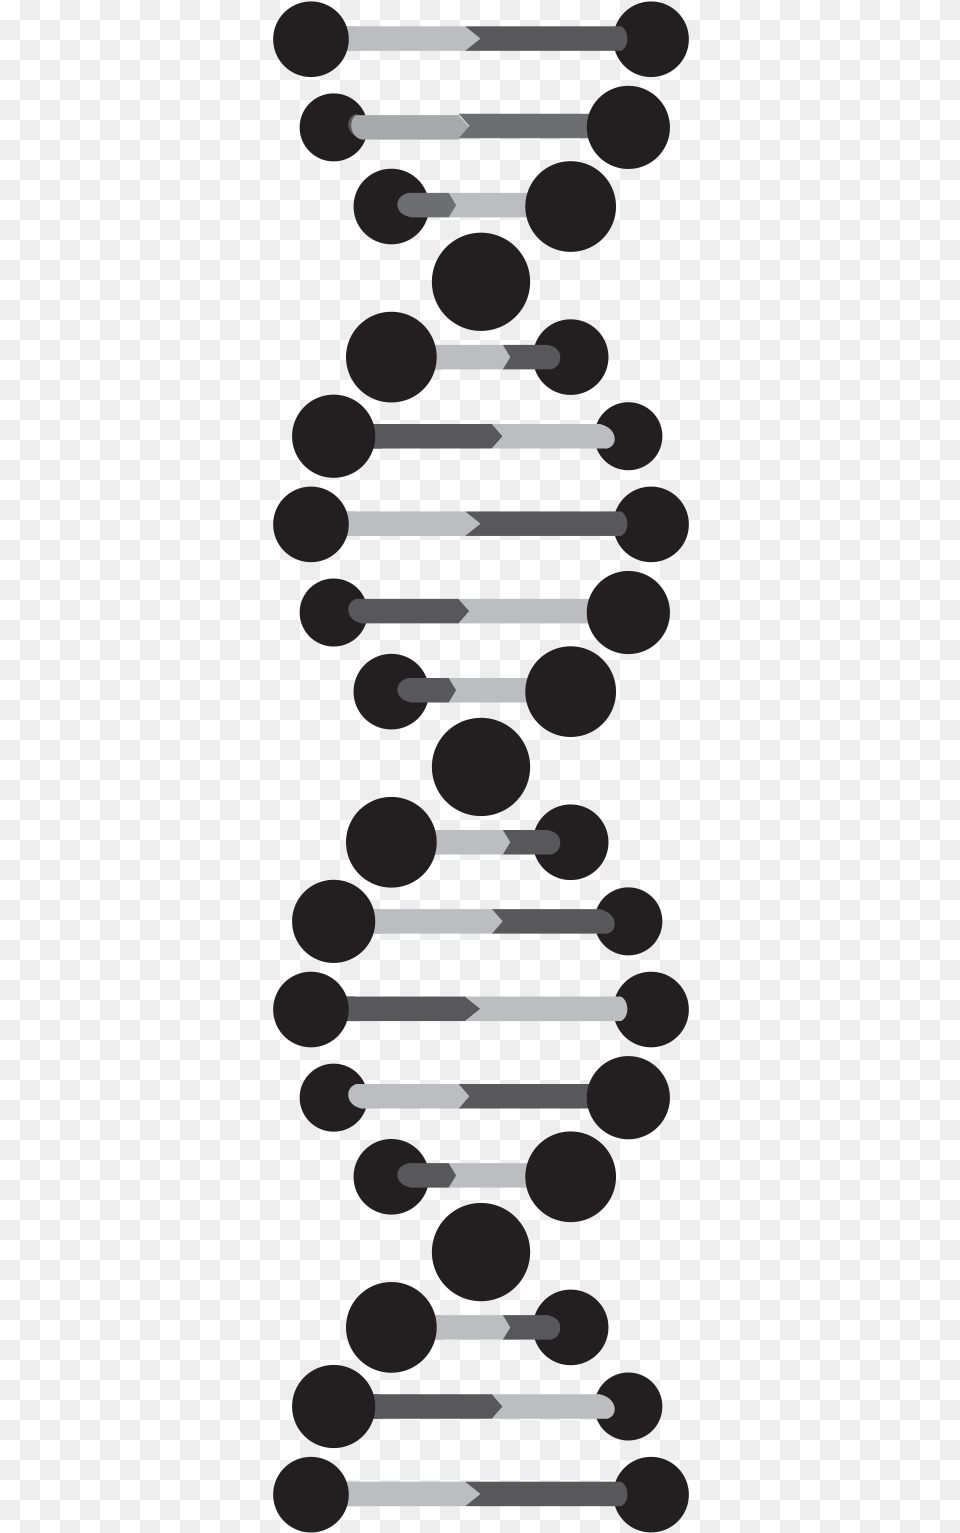 Black And White Dna Strand Download Transparent Background Dna Strand, Cutlery Png Image